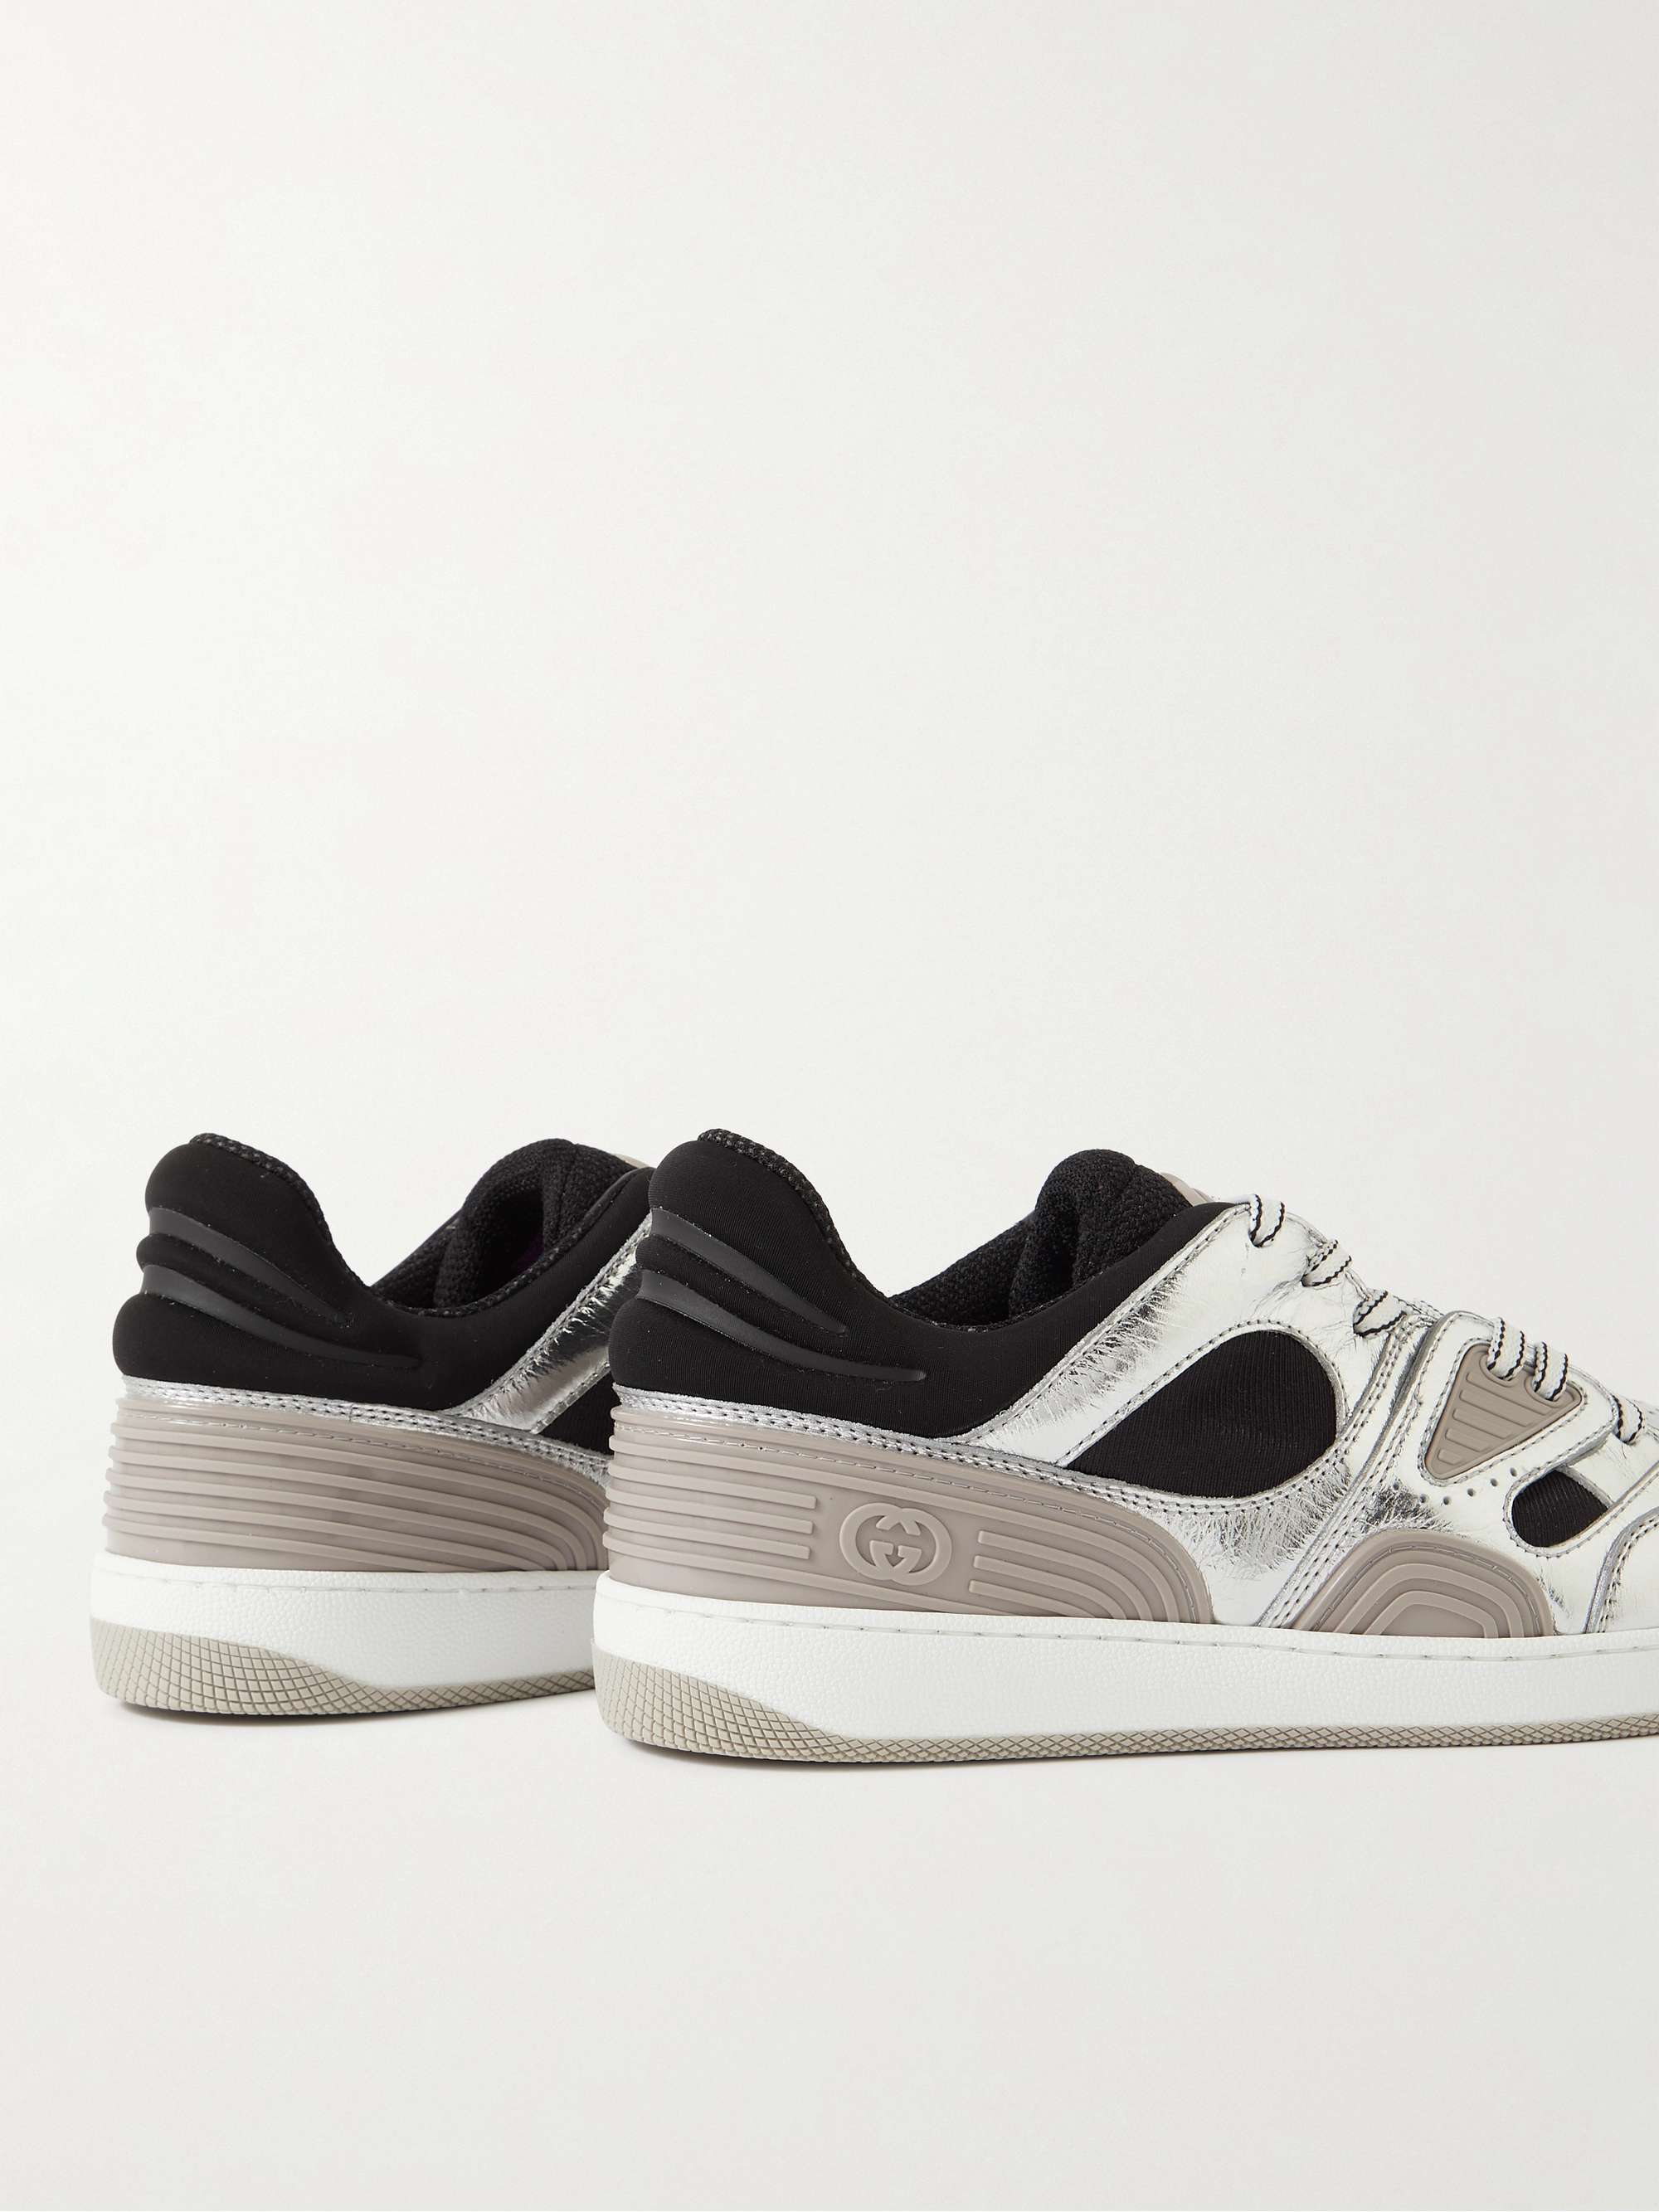 GUCCI Basket Distressed Metallic Leather, Jersey, Mesh and Rubber Sneakers